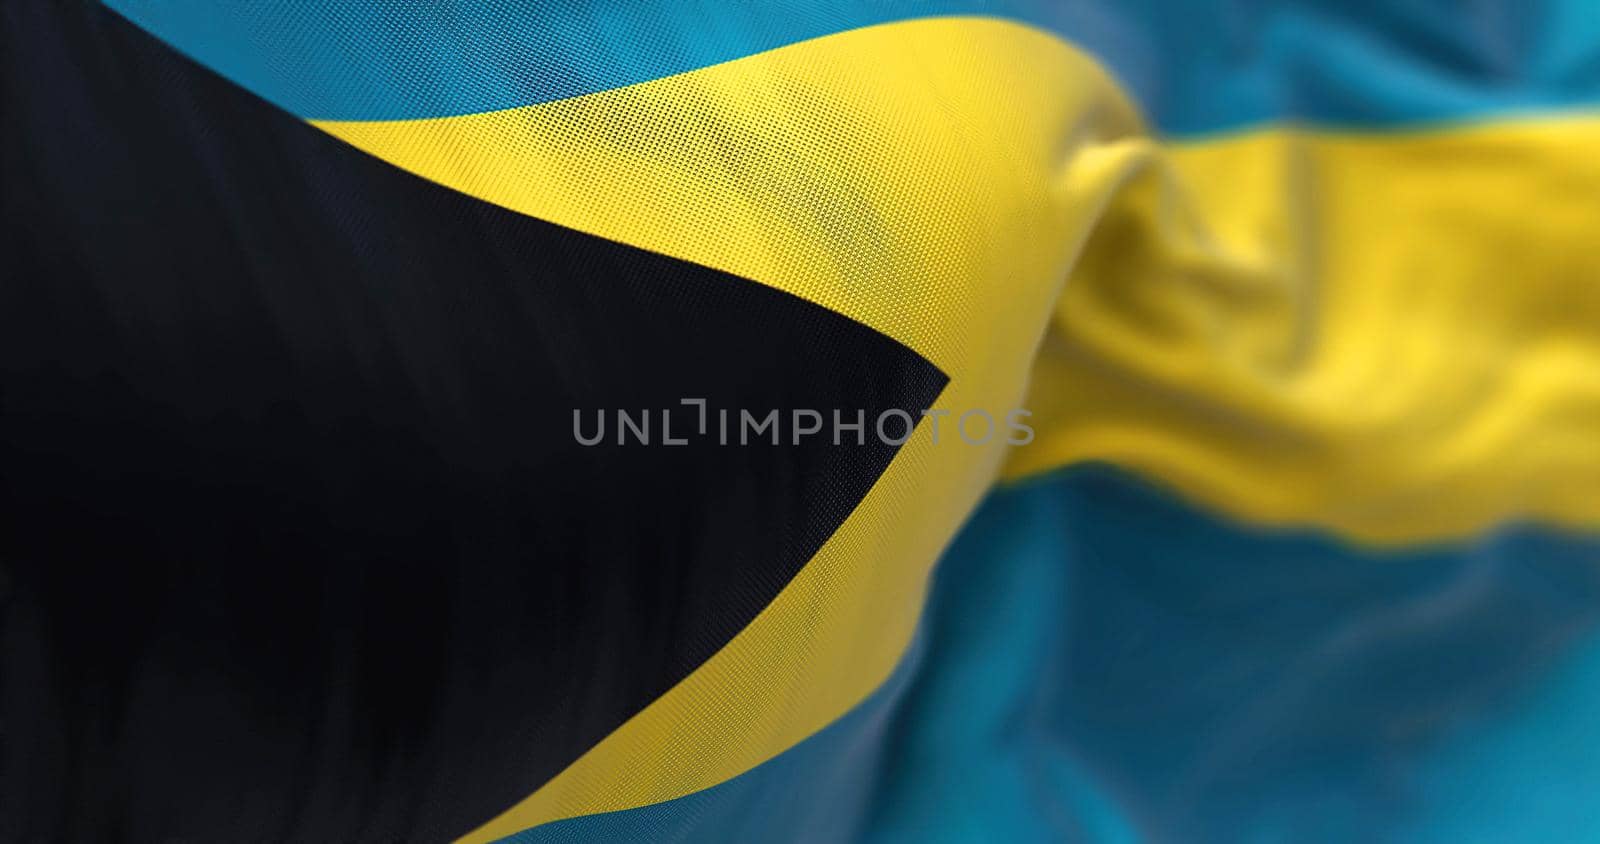 Close-up view of the Bahamas national flag waving in the wind. The Commonwealth of the Bahamas is a country within the Lucayan Archipelago. Fabric textured background. Selective focus